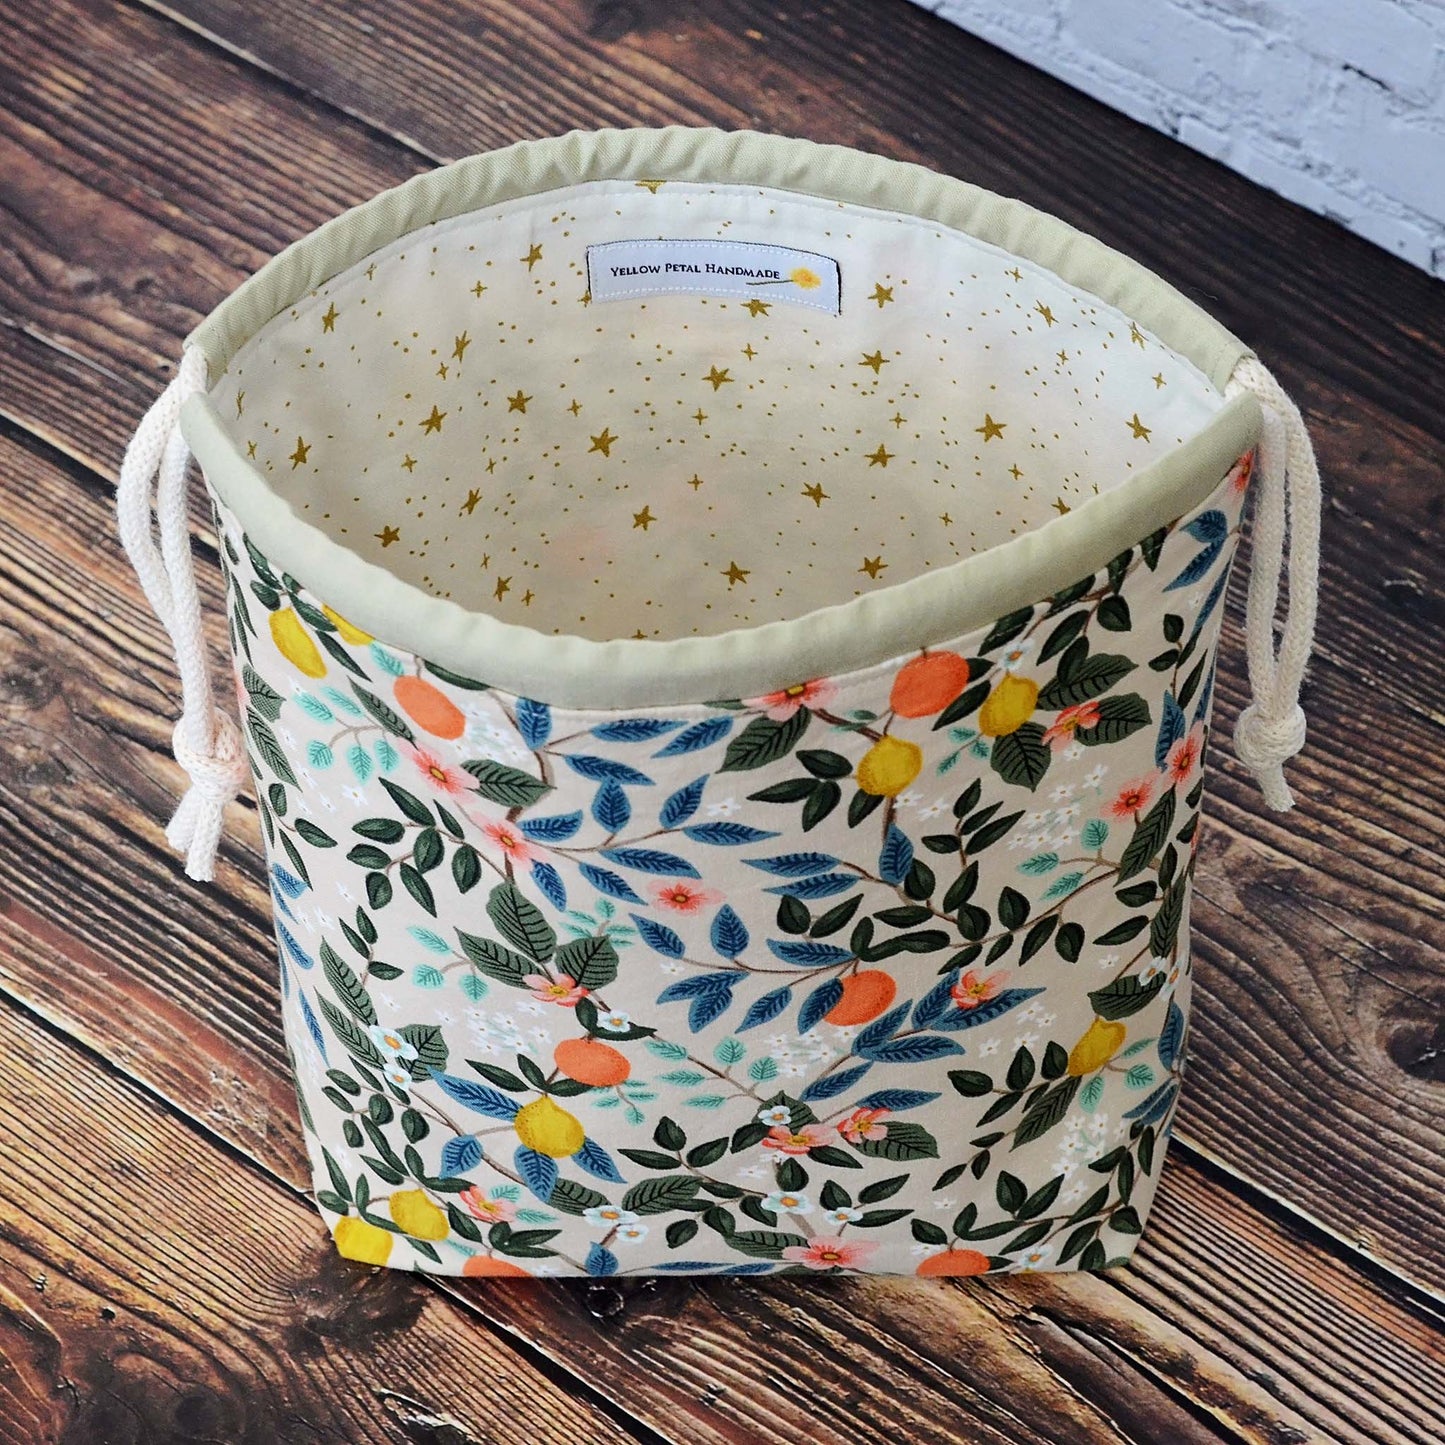 Beige floral and citrus project bag in Rifle Paper Co. Bramble Fabric.  Made in Canada by Yellow Petal Handmade.